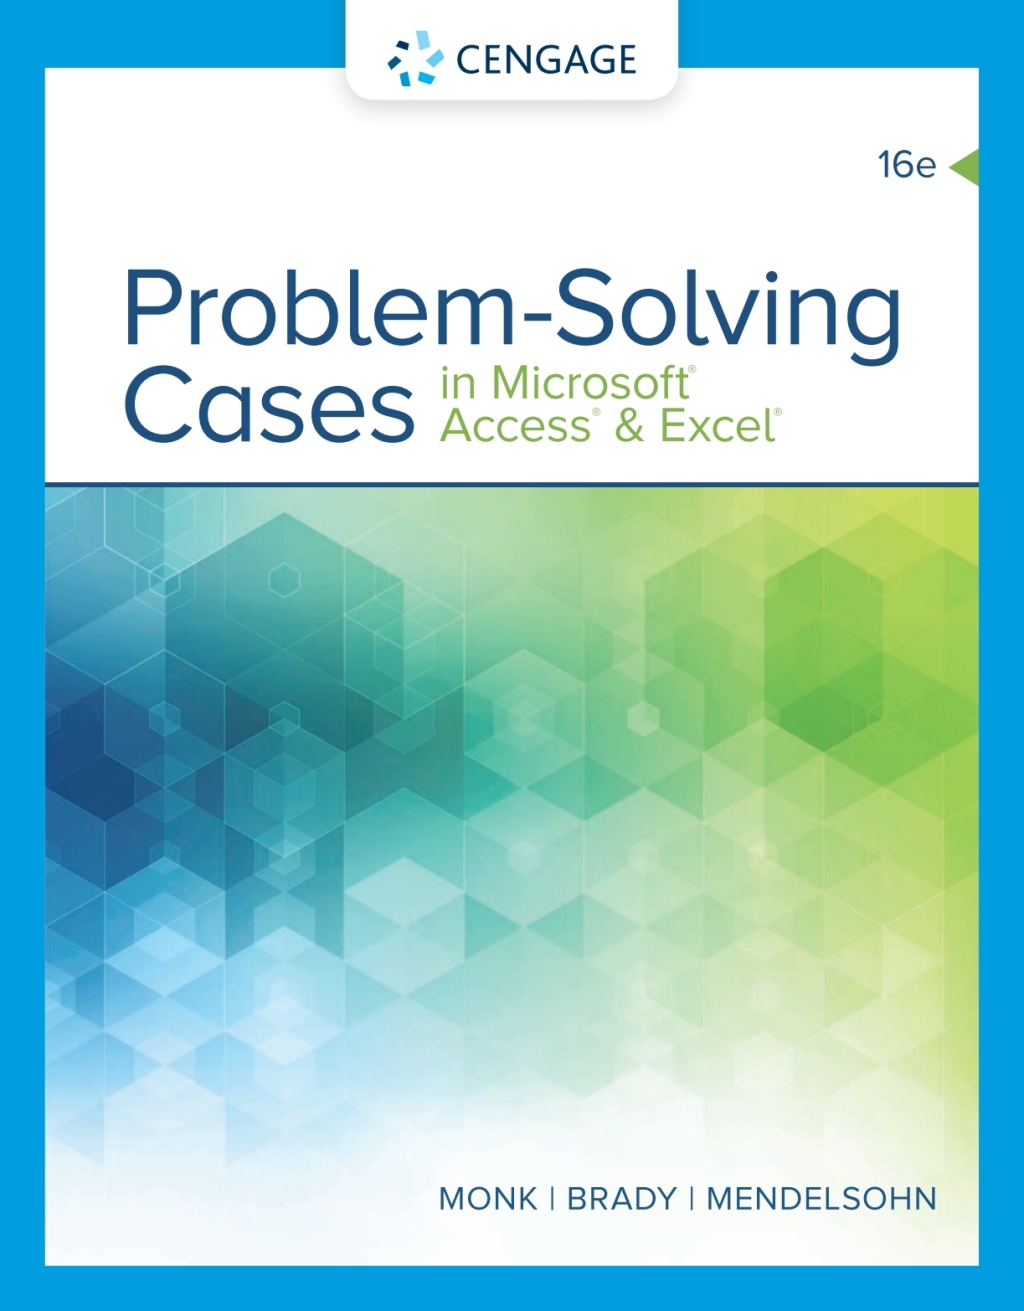 Problem Solving Cases In Microsoft Access & Excel - 16th Edition (eBook Rental)